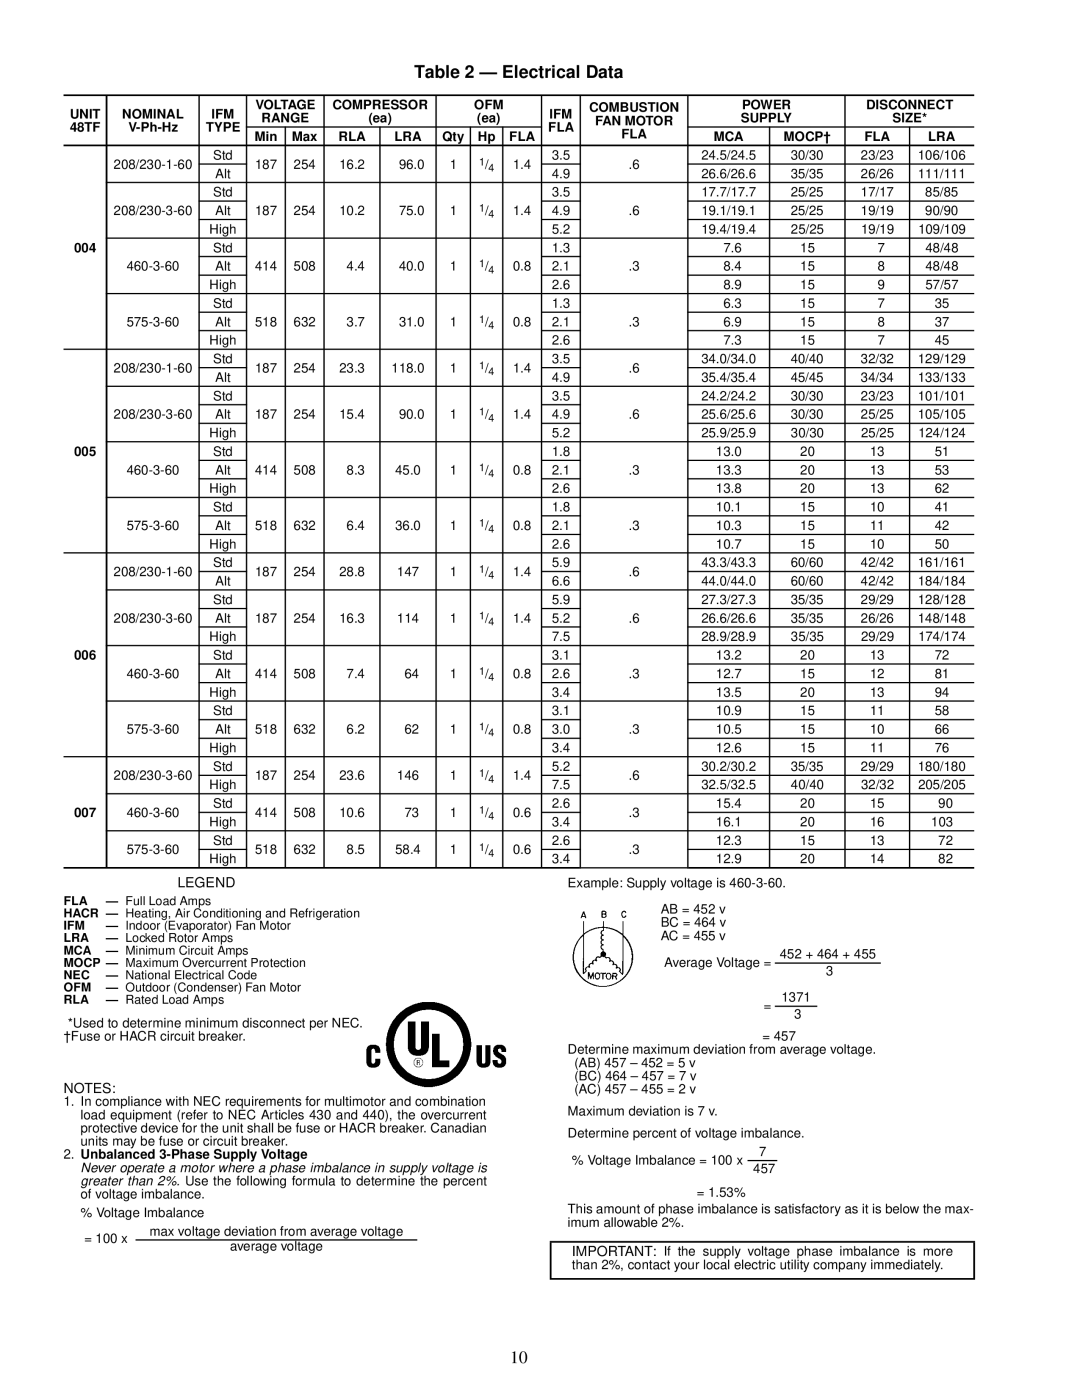 Carrier 48TF004-007 specifications Electrical Data, of voltage imbalance, Voltage Imbalance 